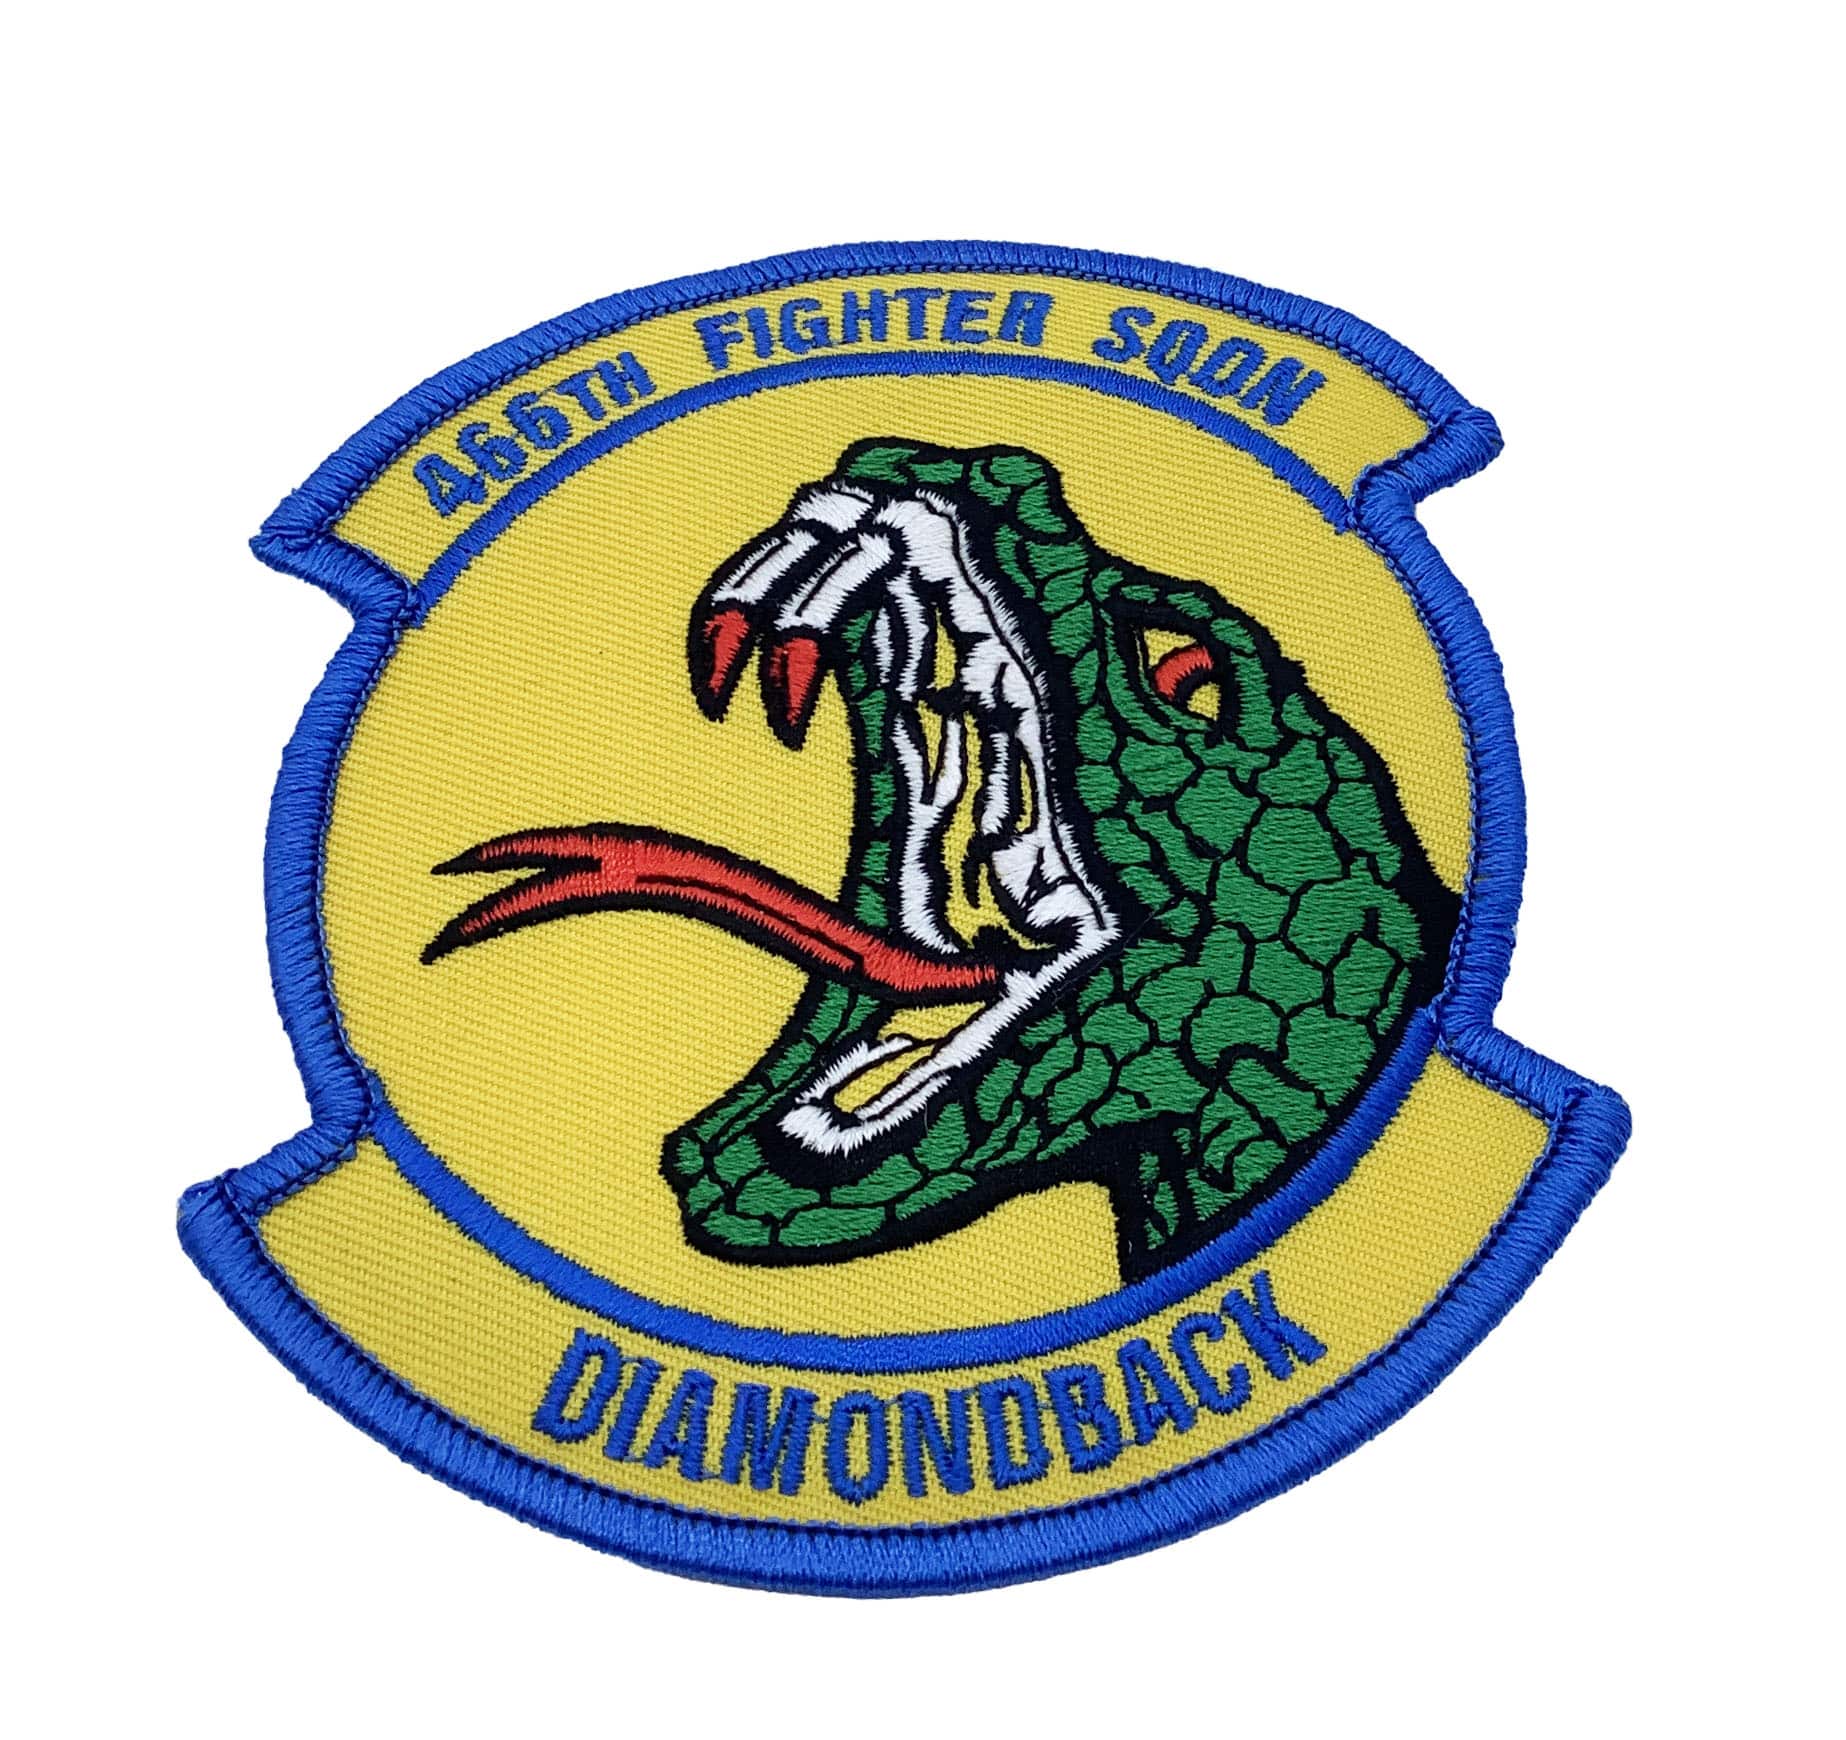 Embroidered And Pvc Air Force Patches By Squadron Nostalgia